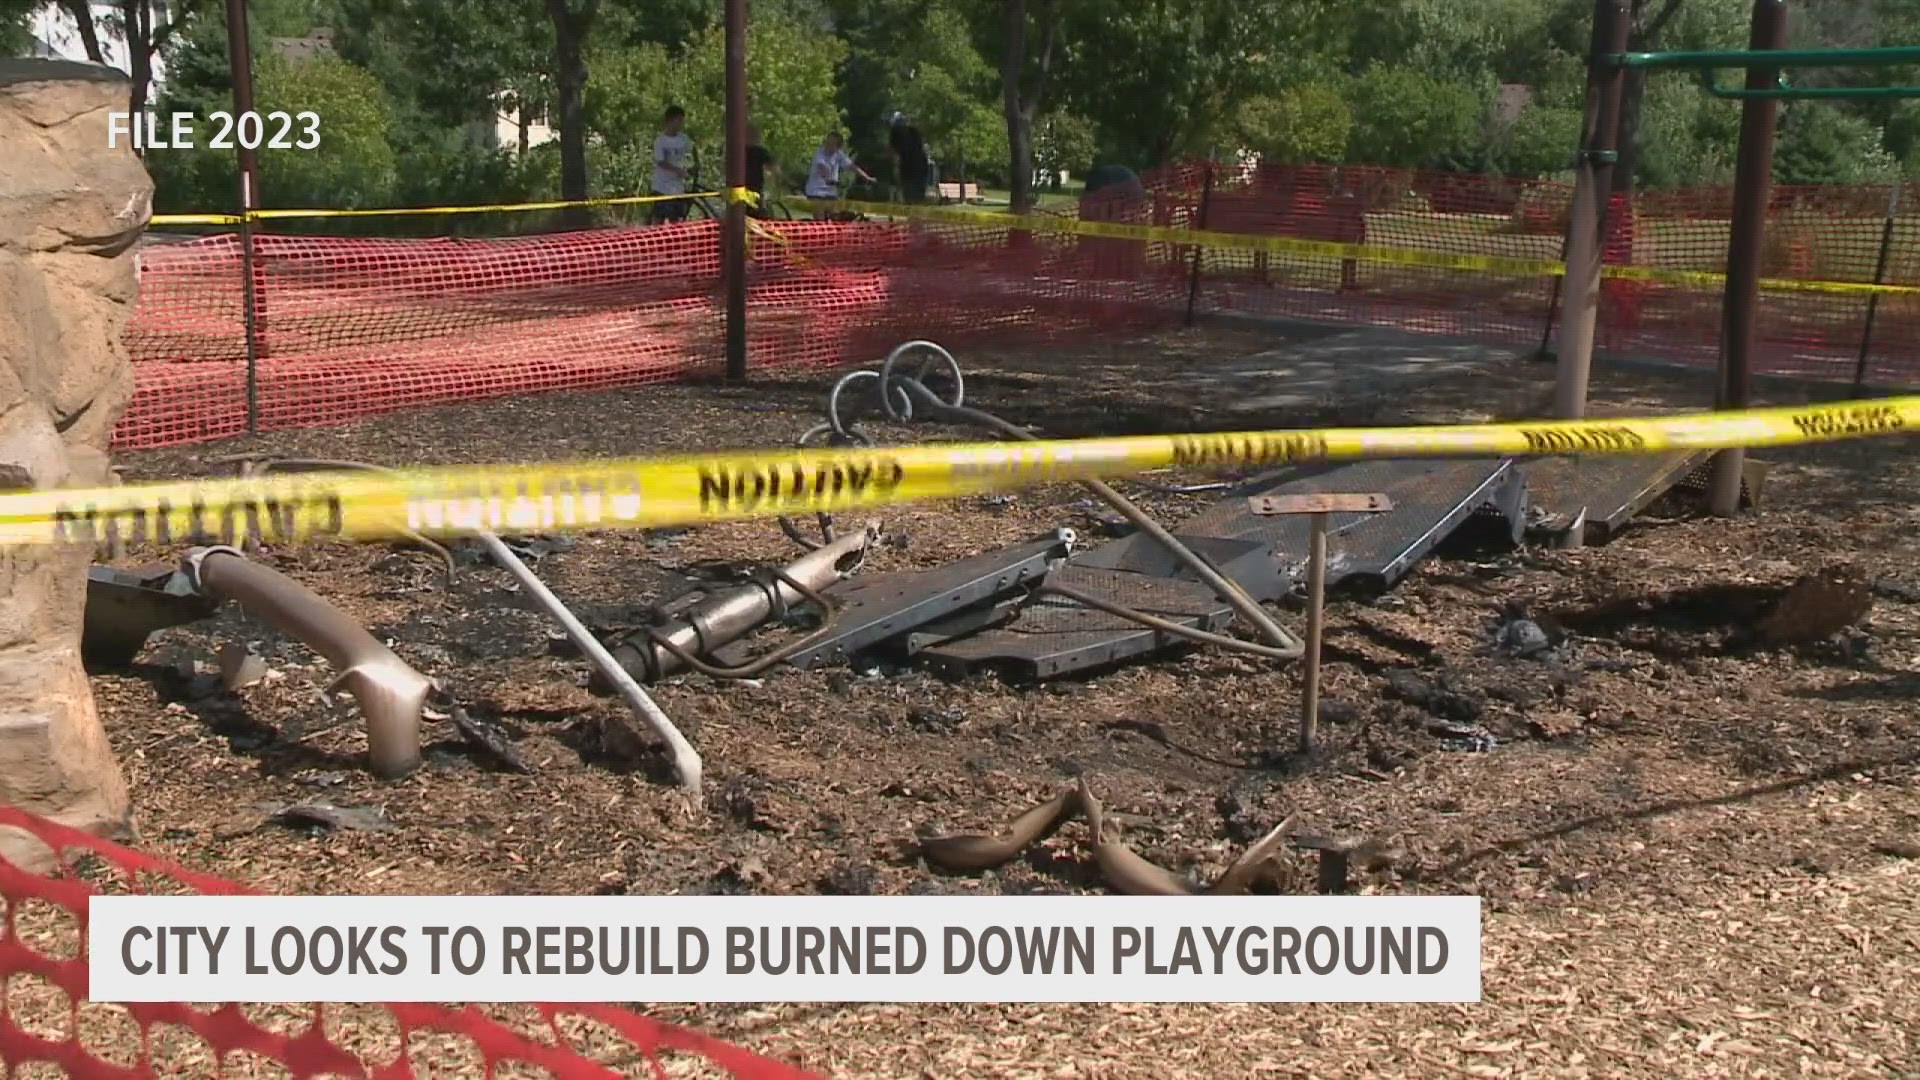 The park was deemed a total loss by city officials after an overnight fire last summer.